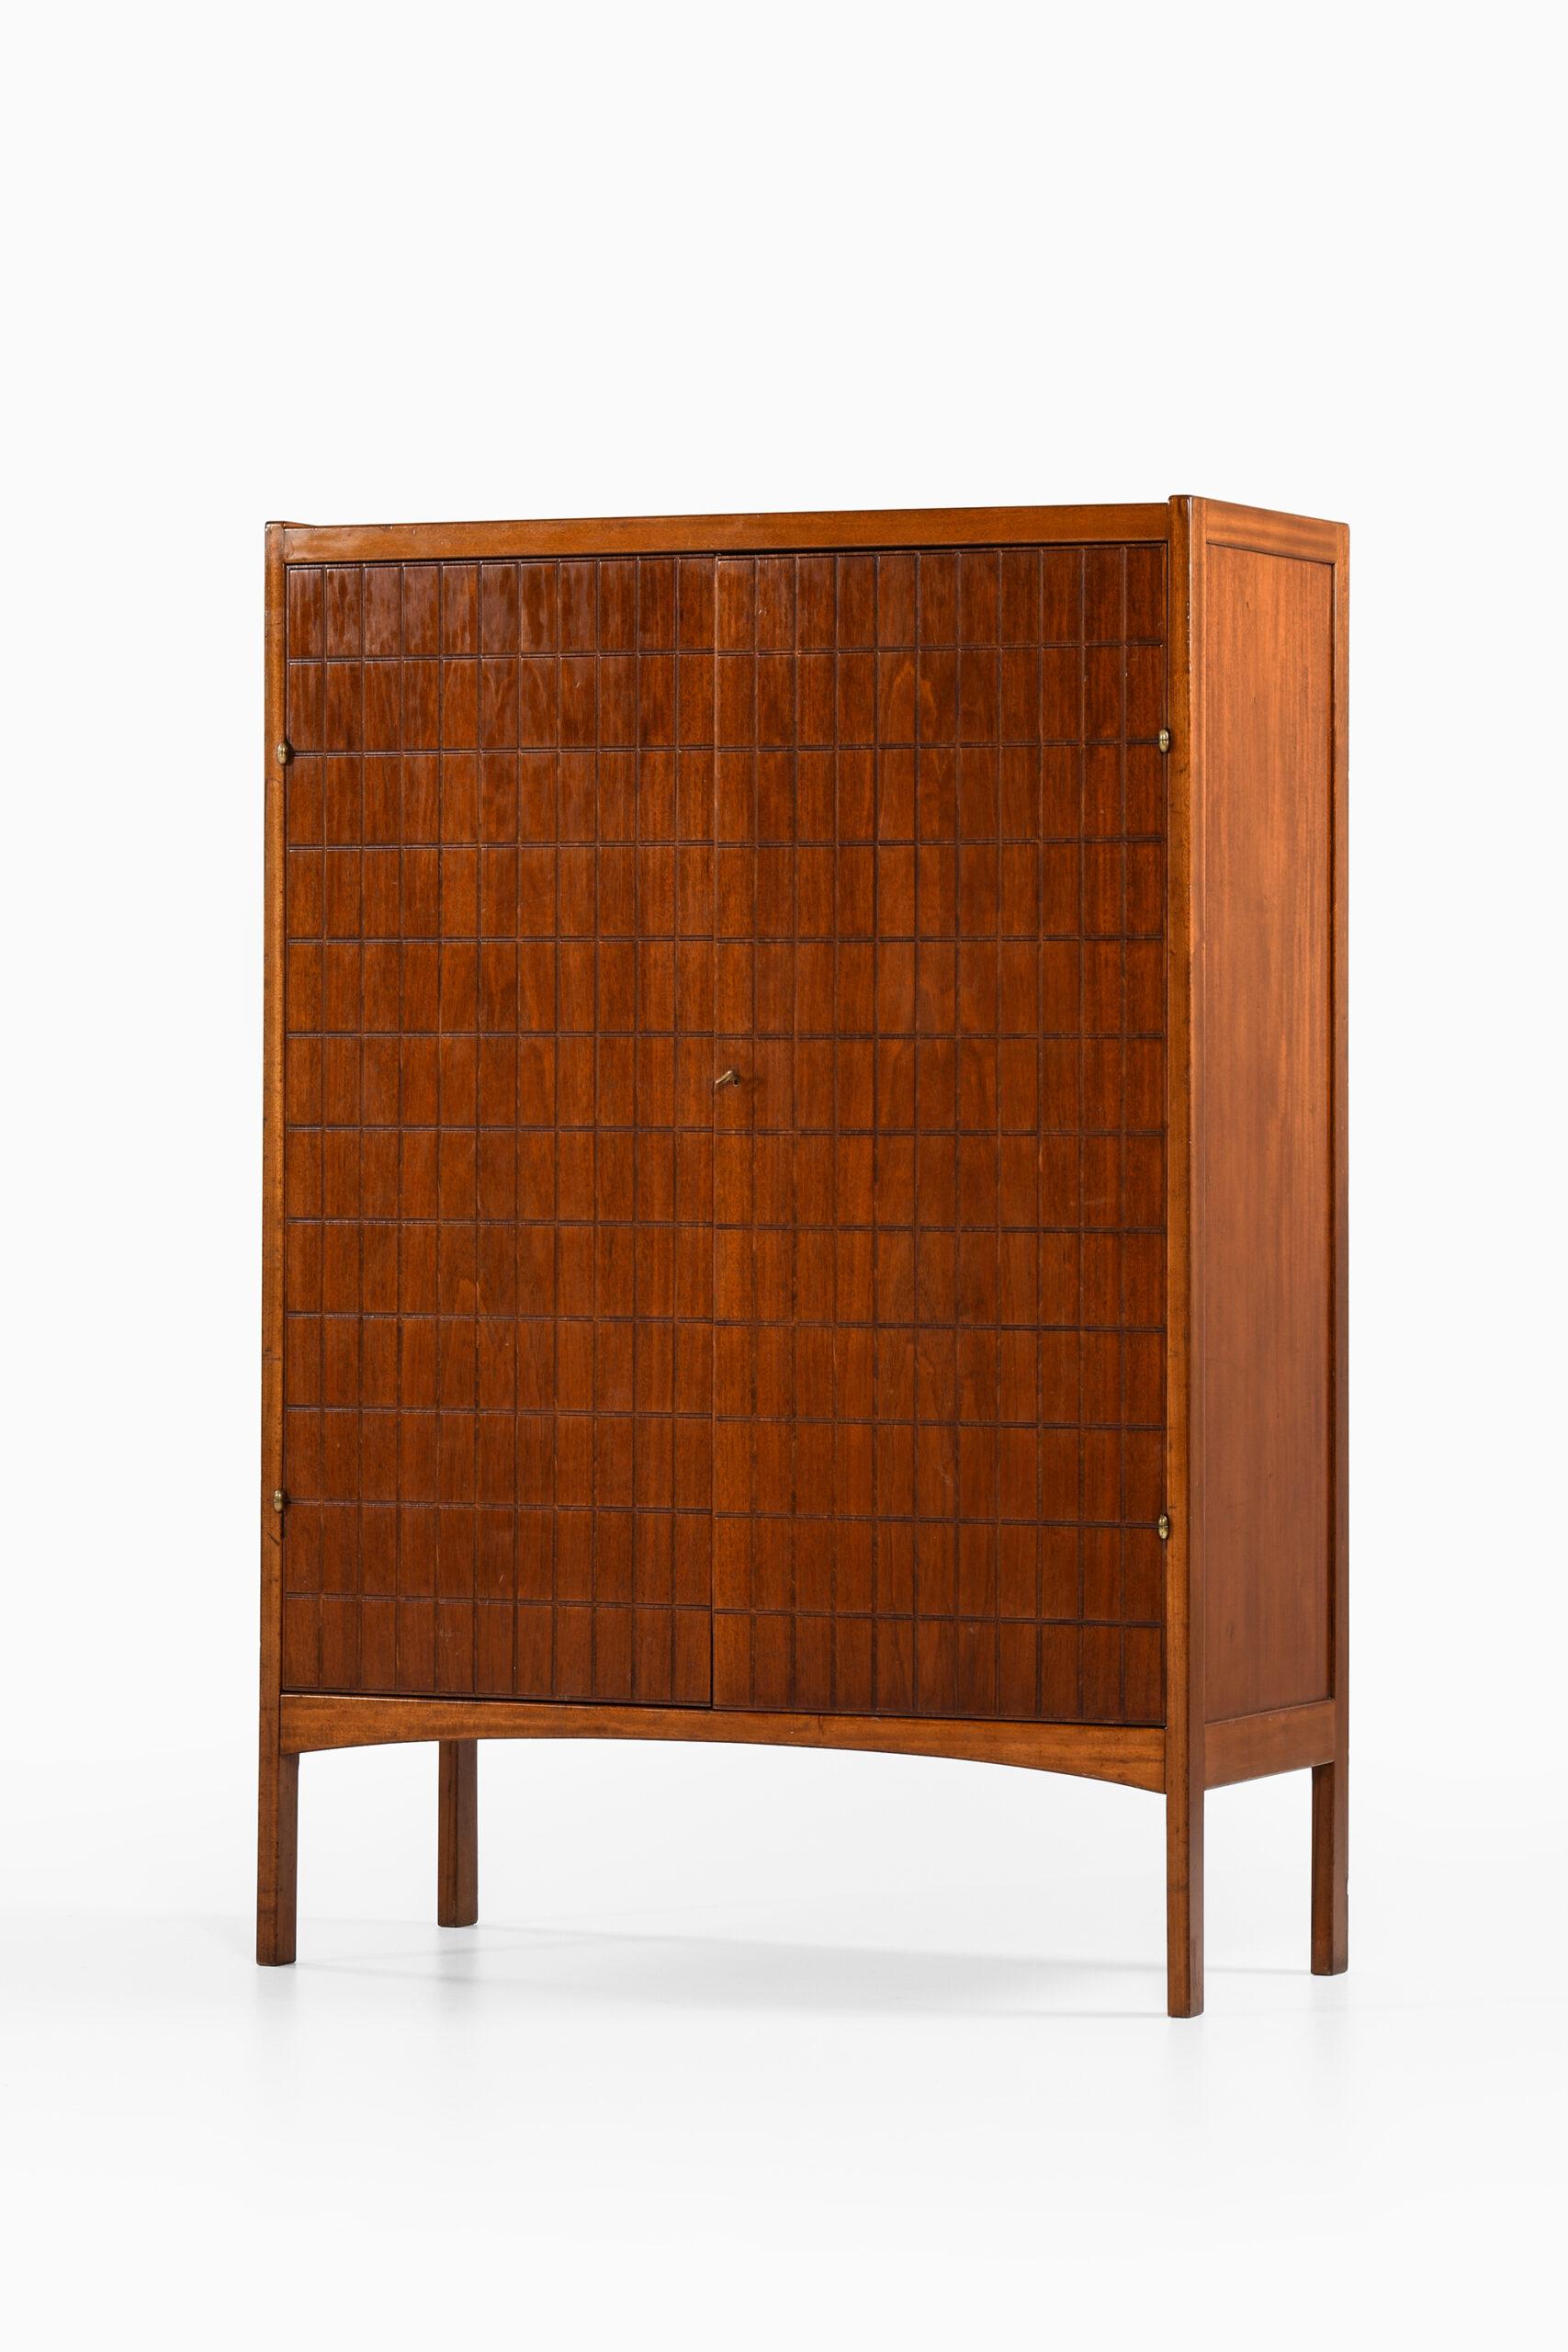 Rare cabinet designed by Carl-Axel Acking. Produced by Nordiska Kompaniet in Sweden.